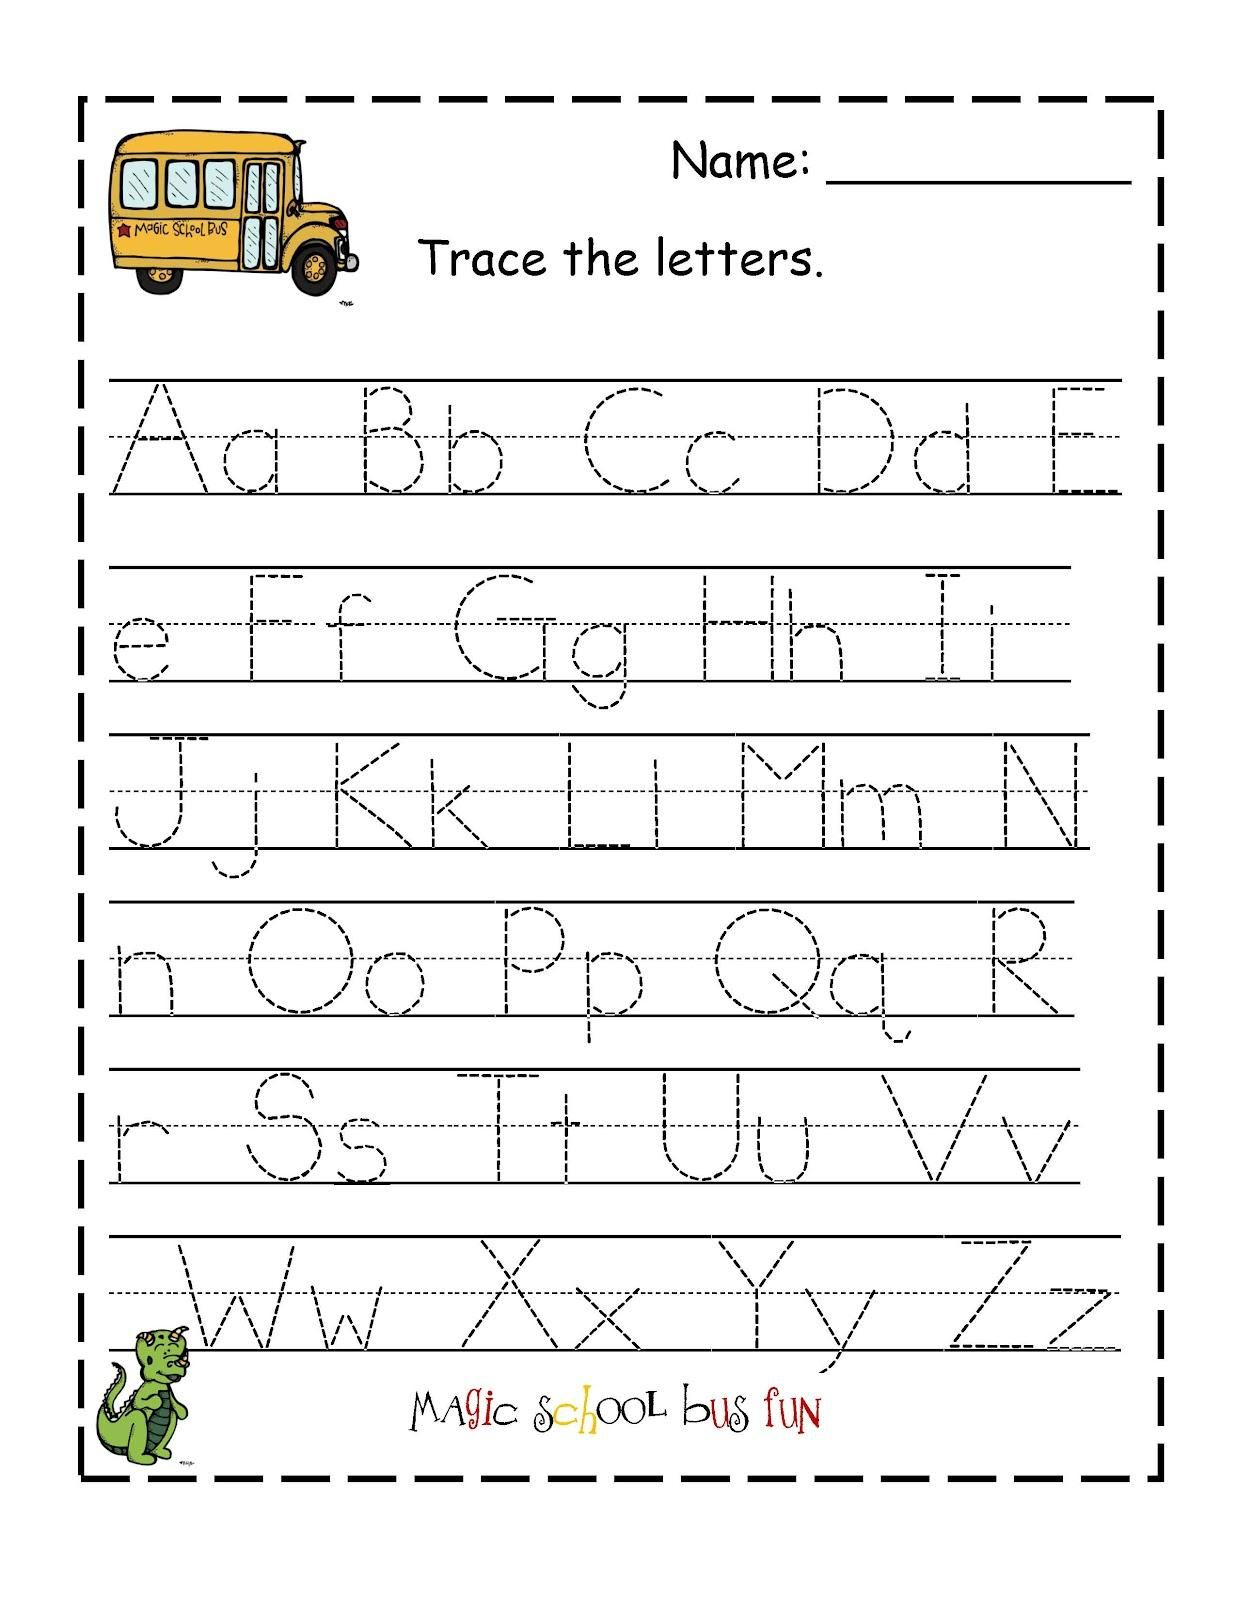 Free Printable Abc Tracing Worksheets #2 | Places To Visit | Free Printable Abc Tracing Worksheets